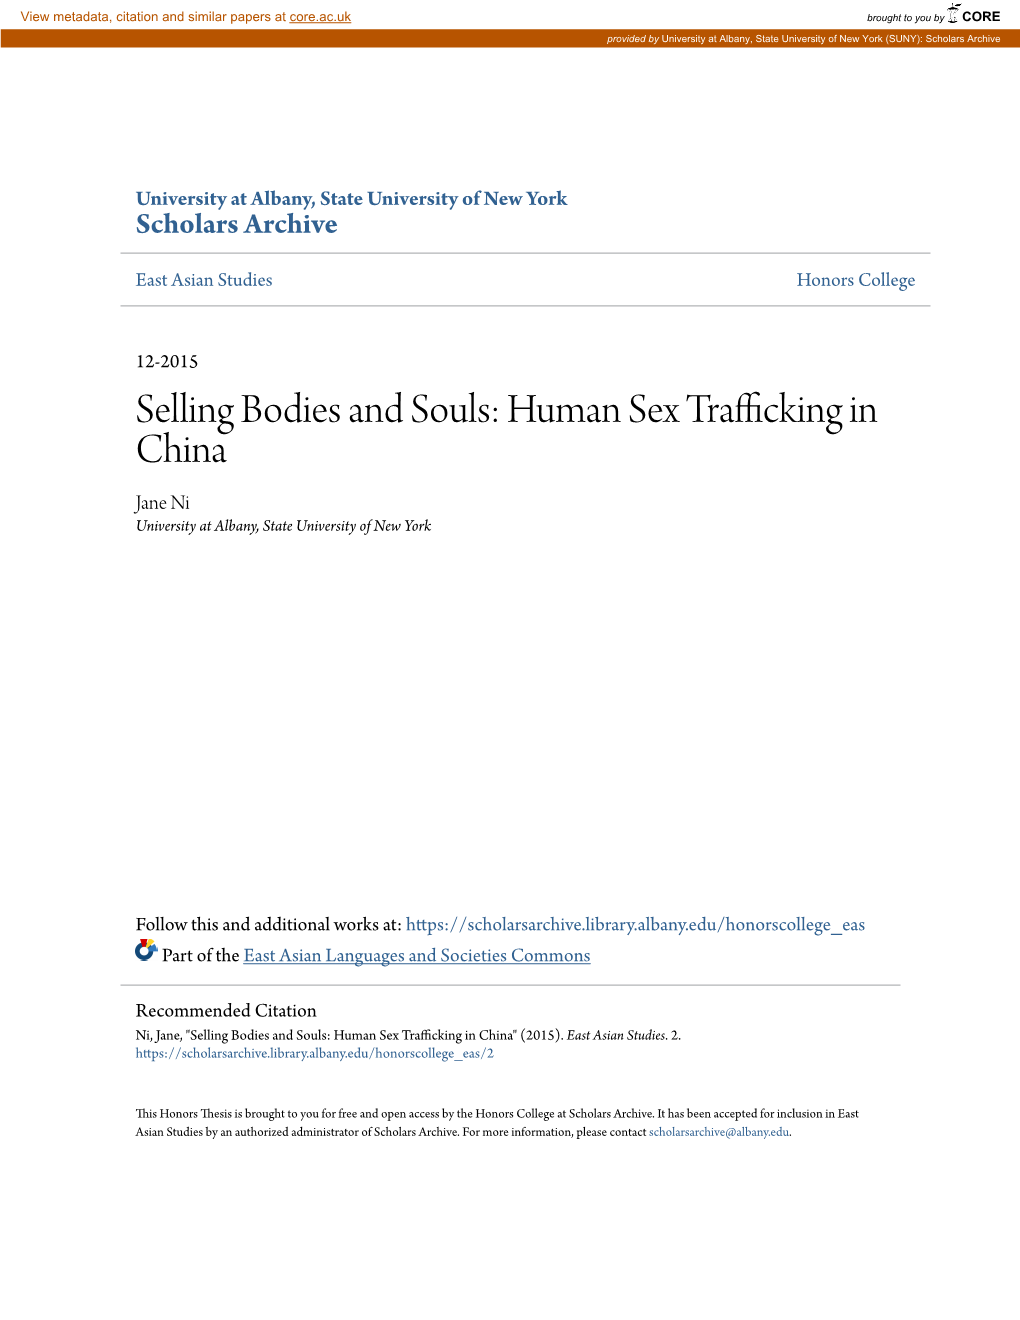 Selling Bodies and Souls: Human Sex Trafficking in China Jane Ni University at Albany, State University of New York